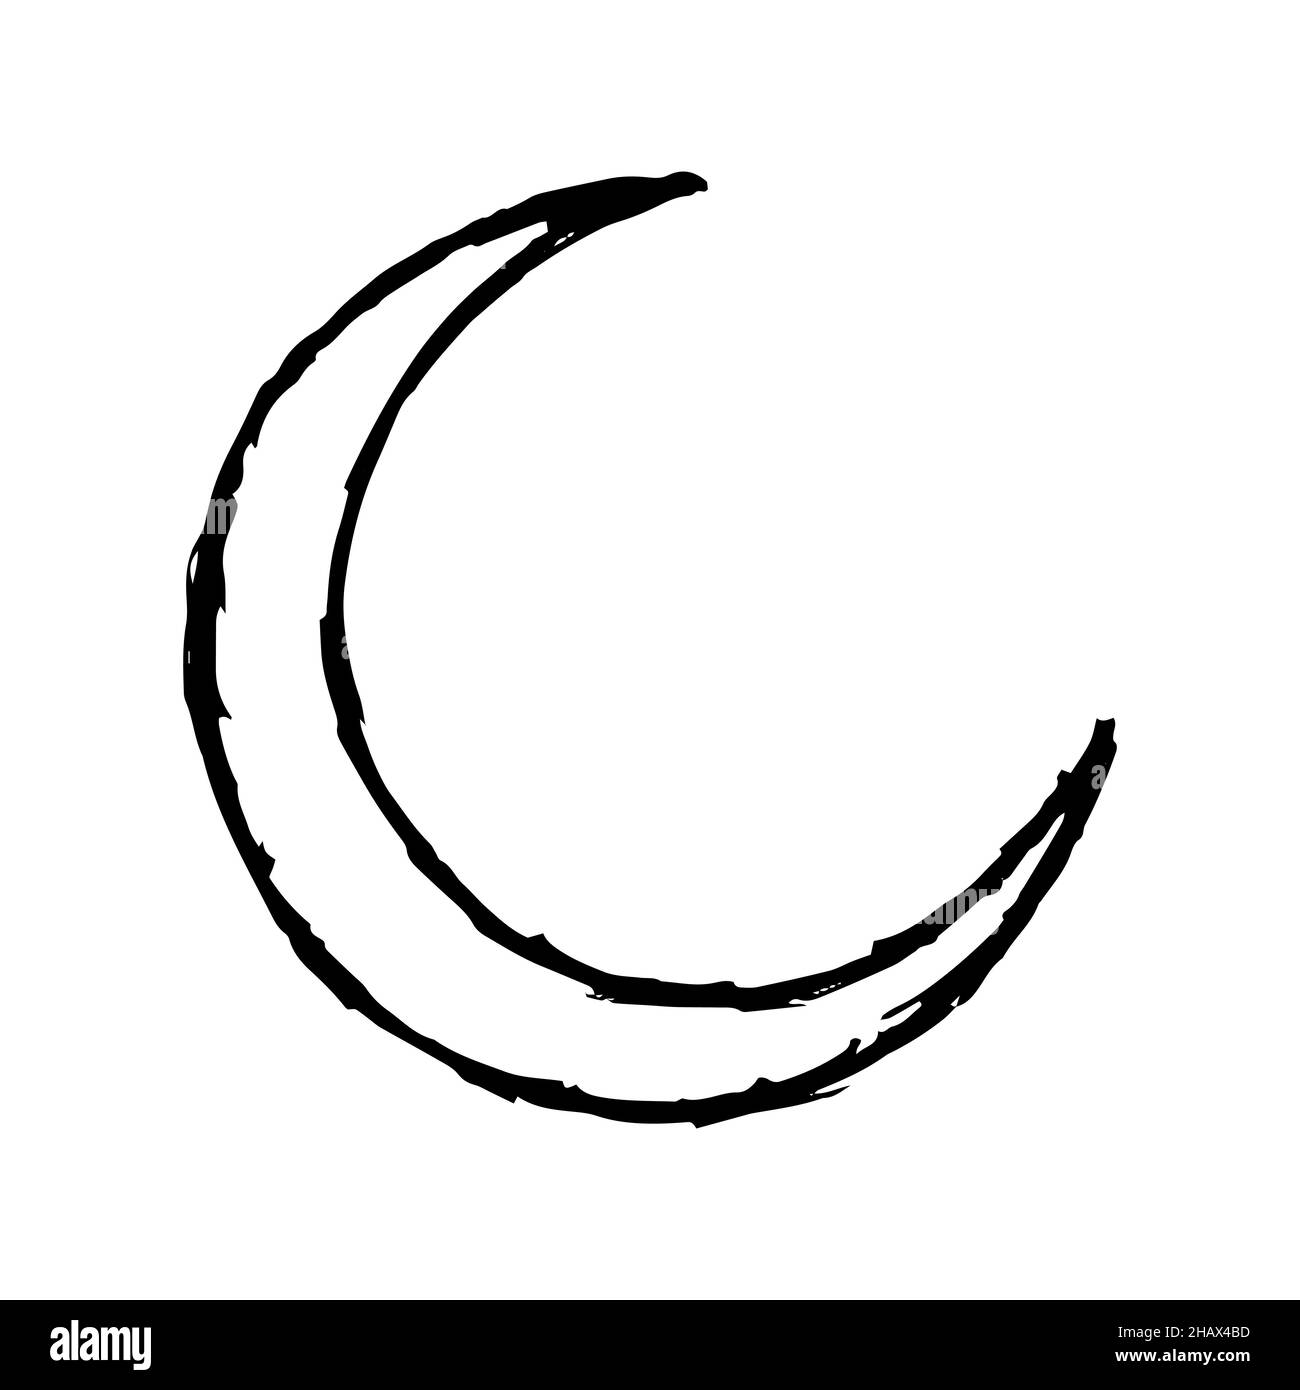 Crescent drawing icon. Hand drawn moon sign. Vector eps sketch isolated night symbol Stock Vector